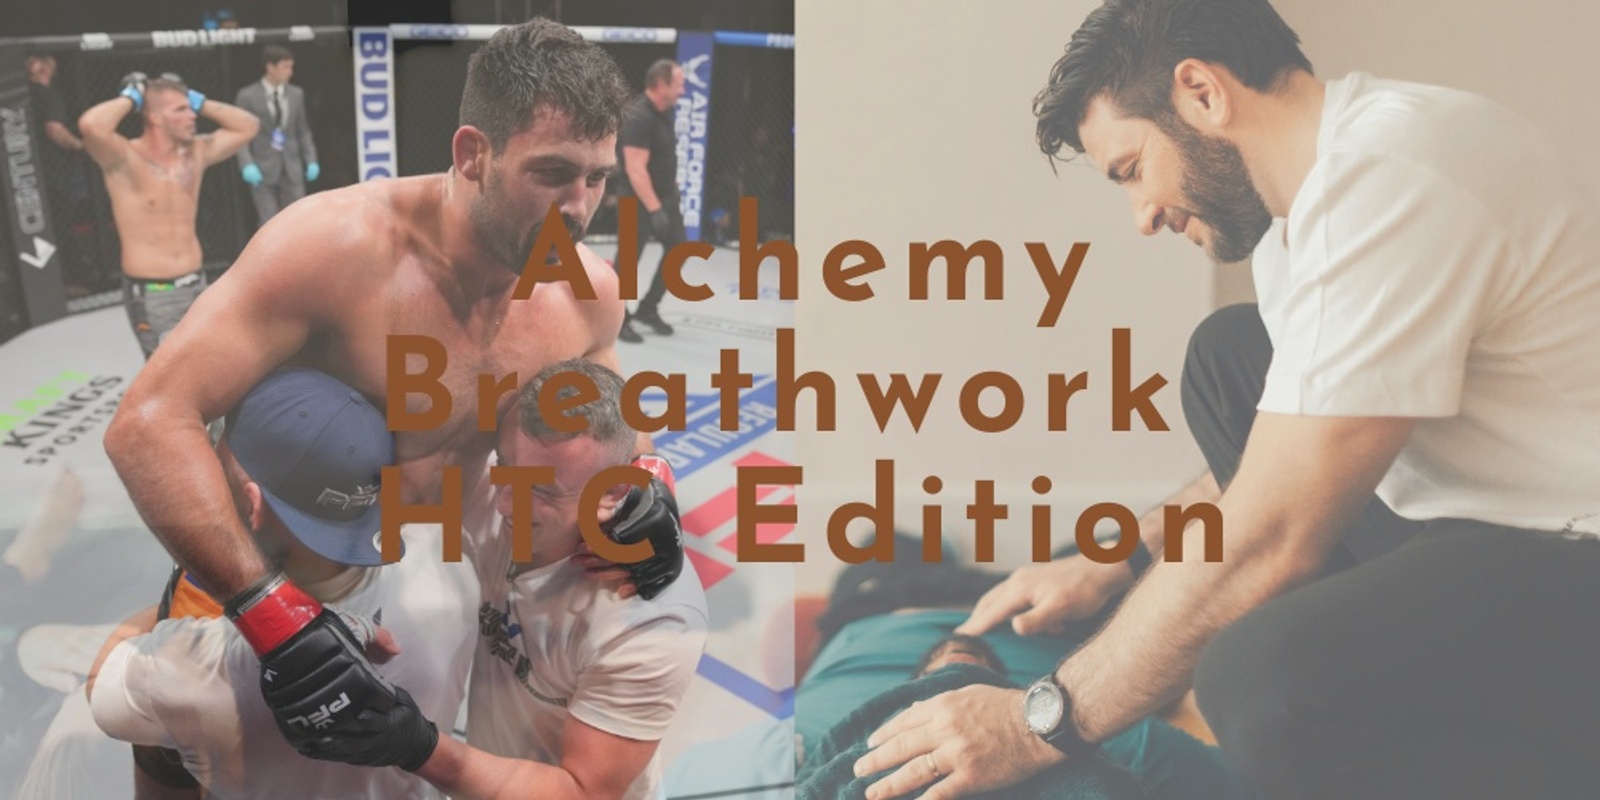 Banner image for Alchemy Breathwork HTC Private Session